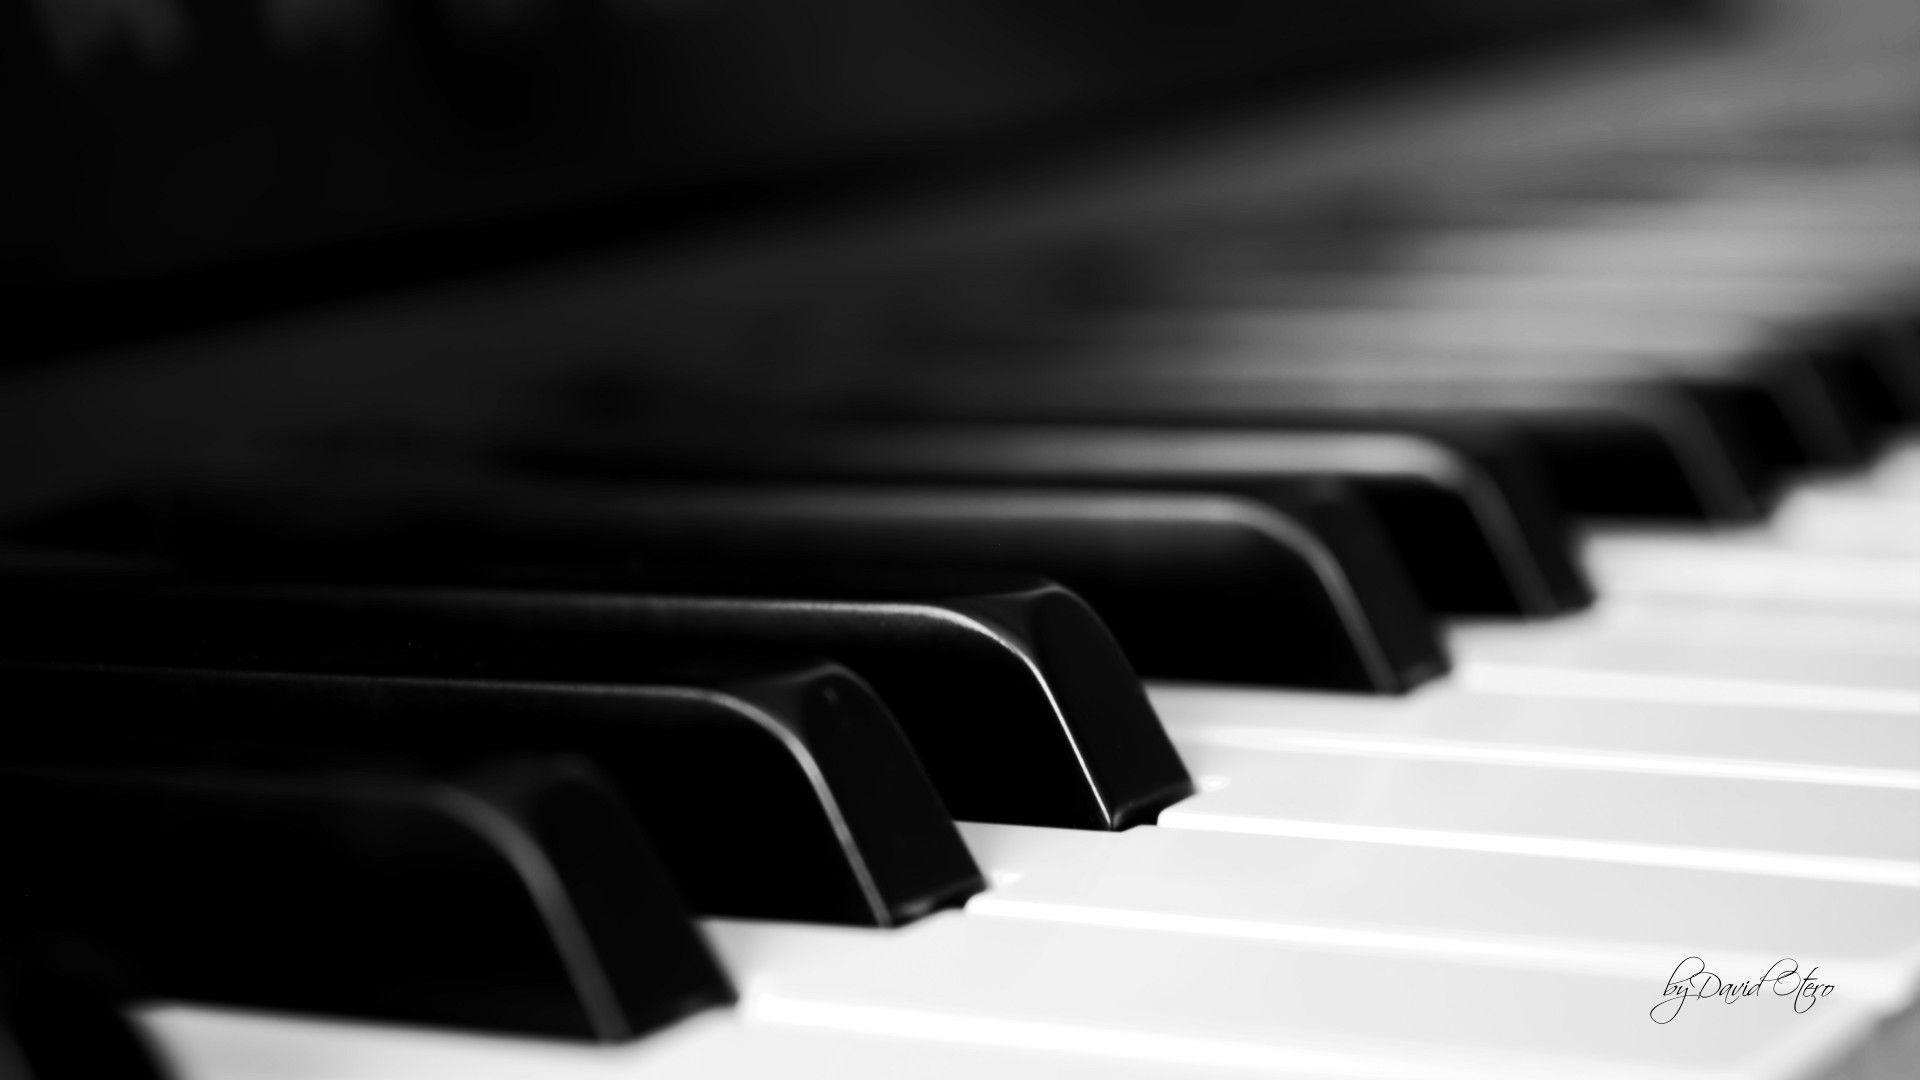 Wallpaper For > Awesome Piano Wallpaper